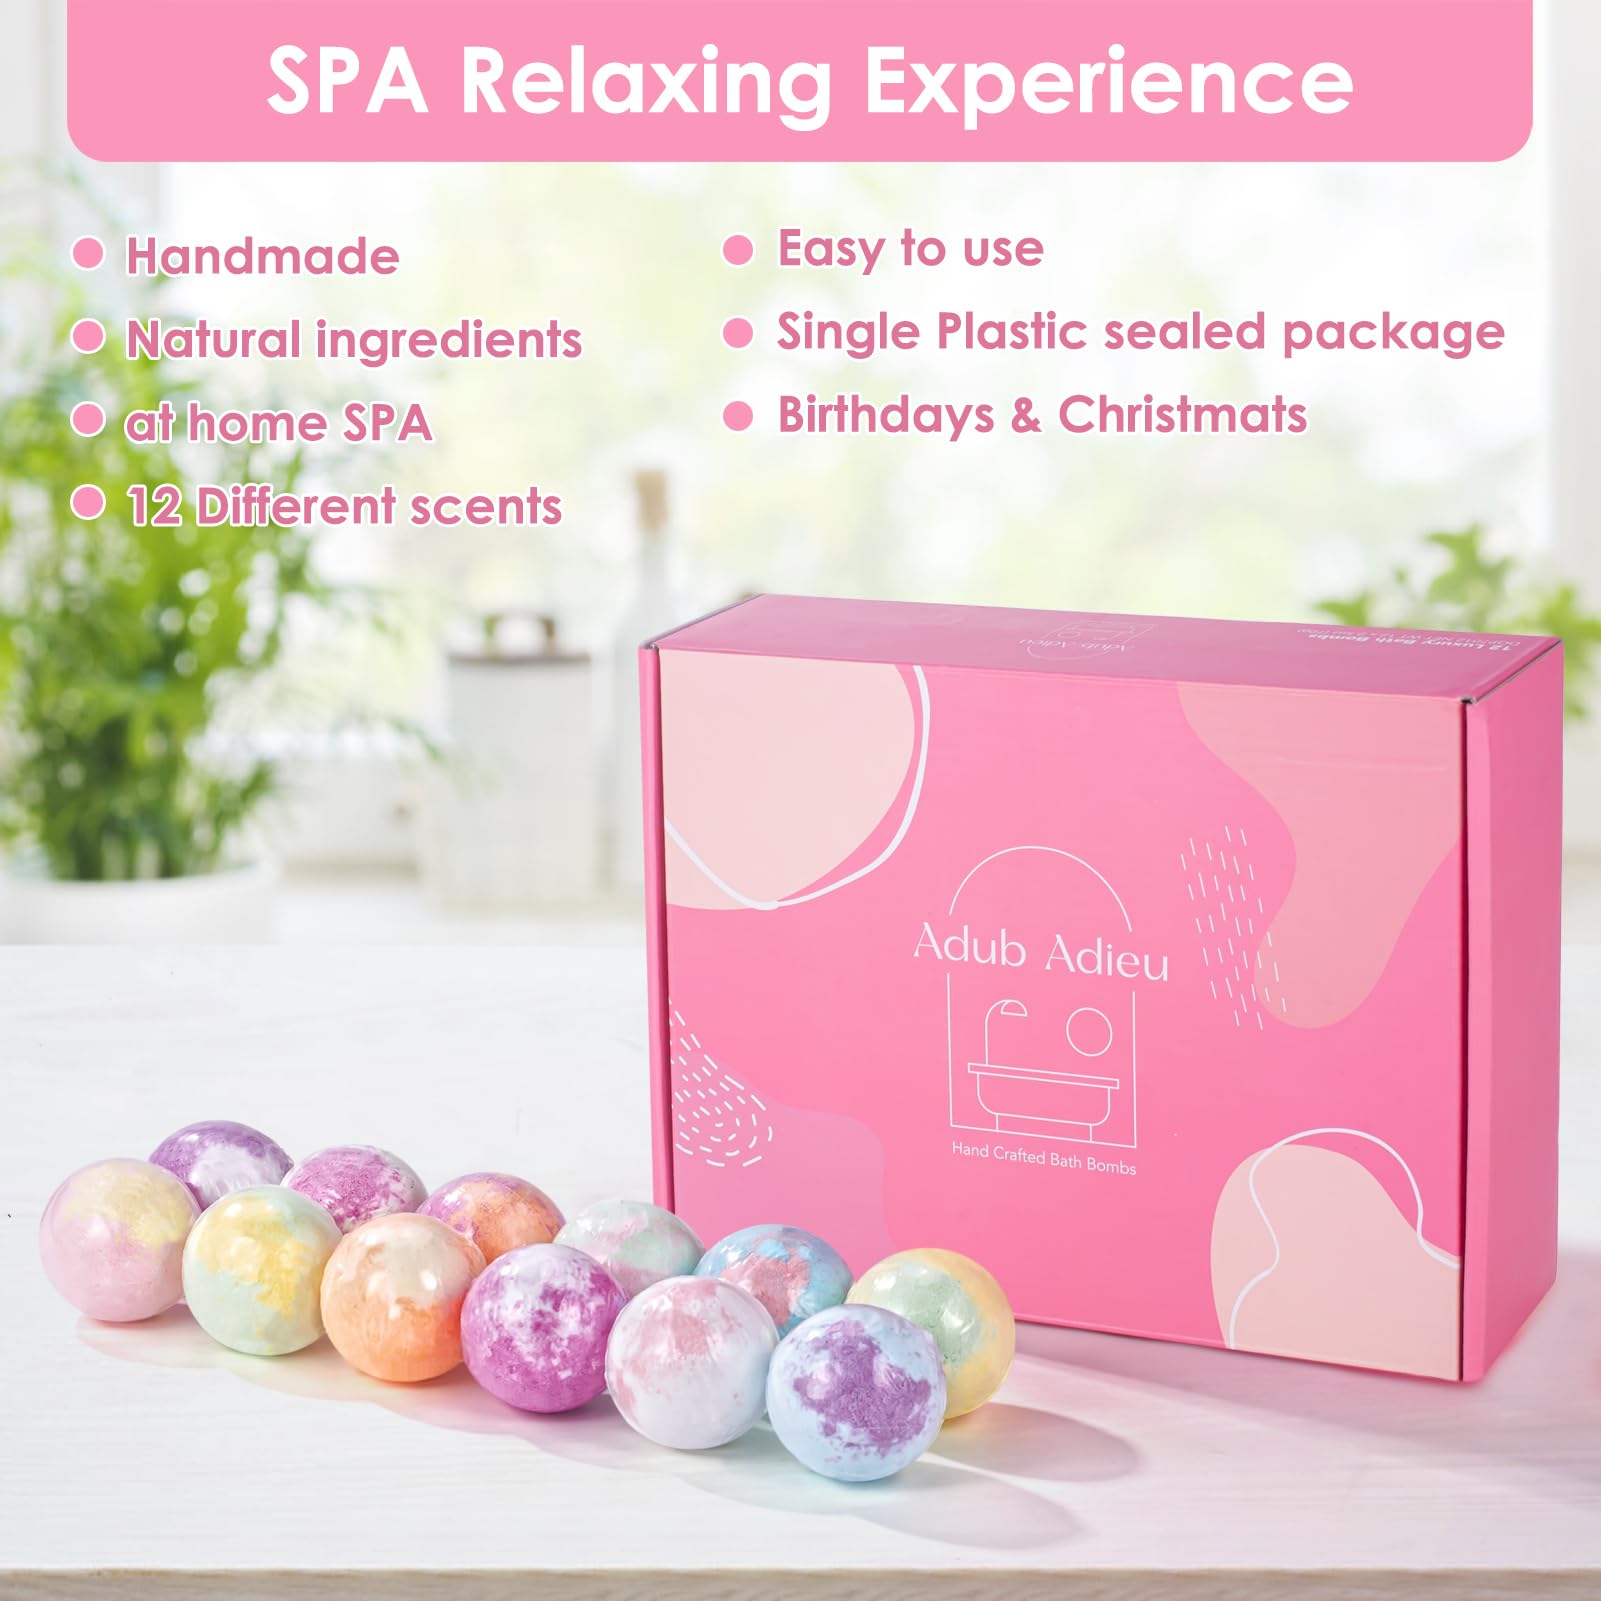 Sublime Beauty Group Bath Bombs for Women, 12 Large Bath Bomb Bubble Bath Set Spa Gifts for Women, Natural Handmade Bath Bombs Rich in Essential Oils, Romantic Gifts for Her, Wife, Multicolor